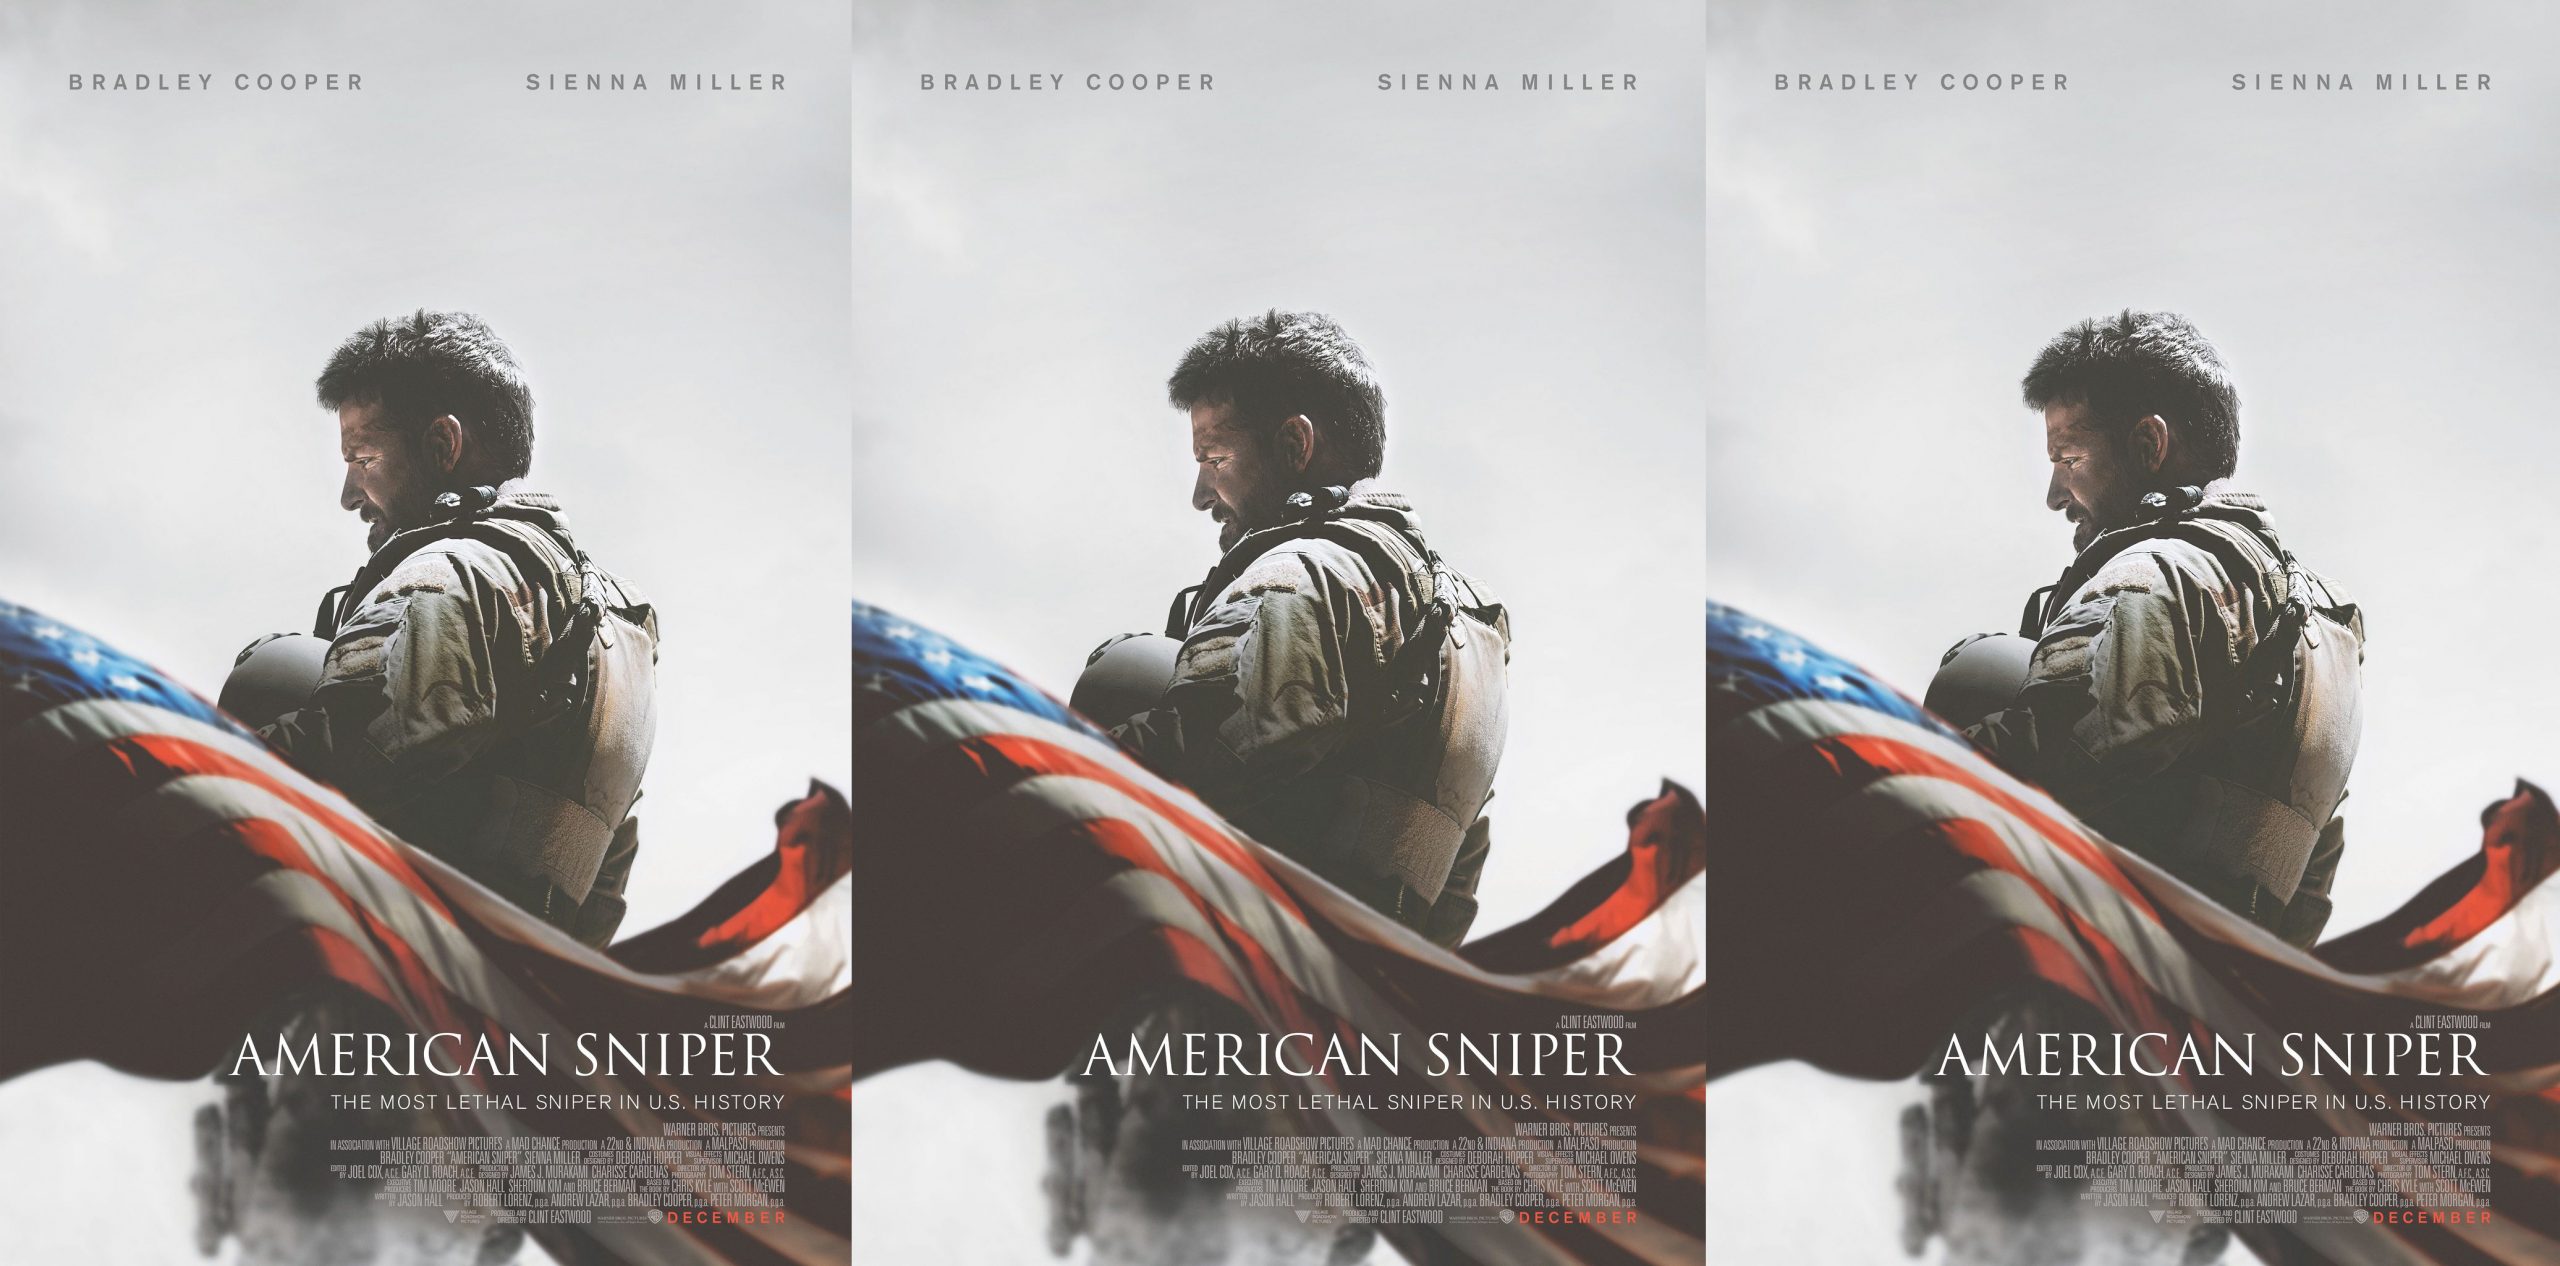 American Sniper, Max, Warner Bros., Village Roadshow Pictures, RatPac-Dune Entertainment, Mad Chance, Joint Effort, Malpaso Productions, Zak Productions